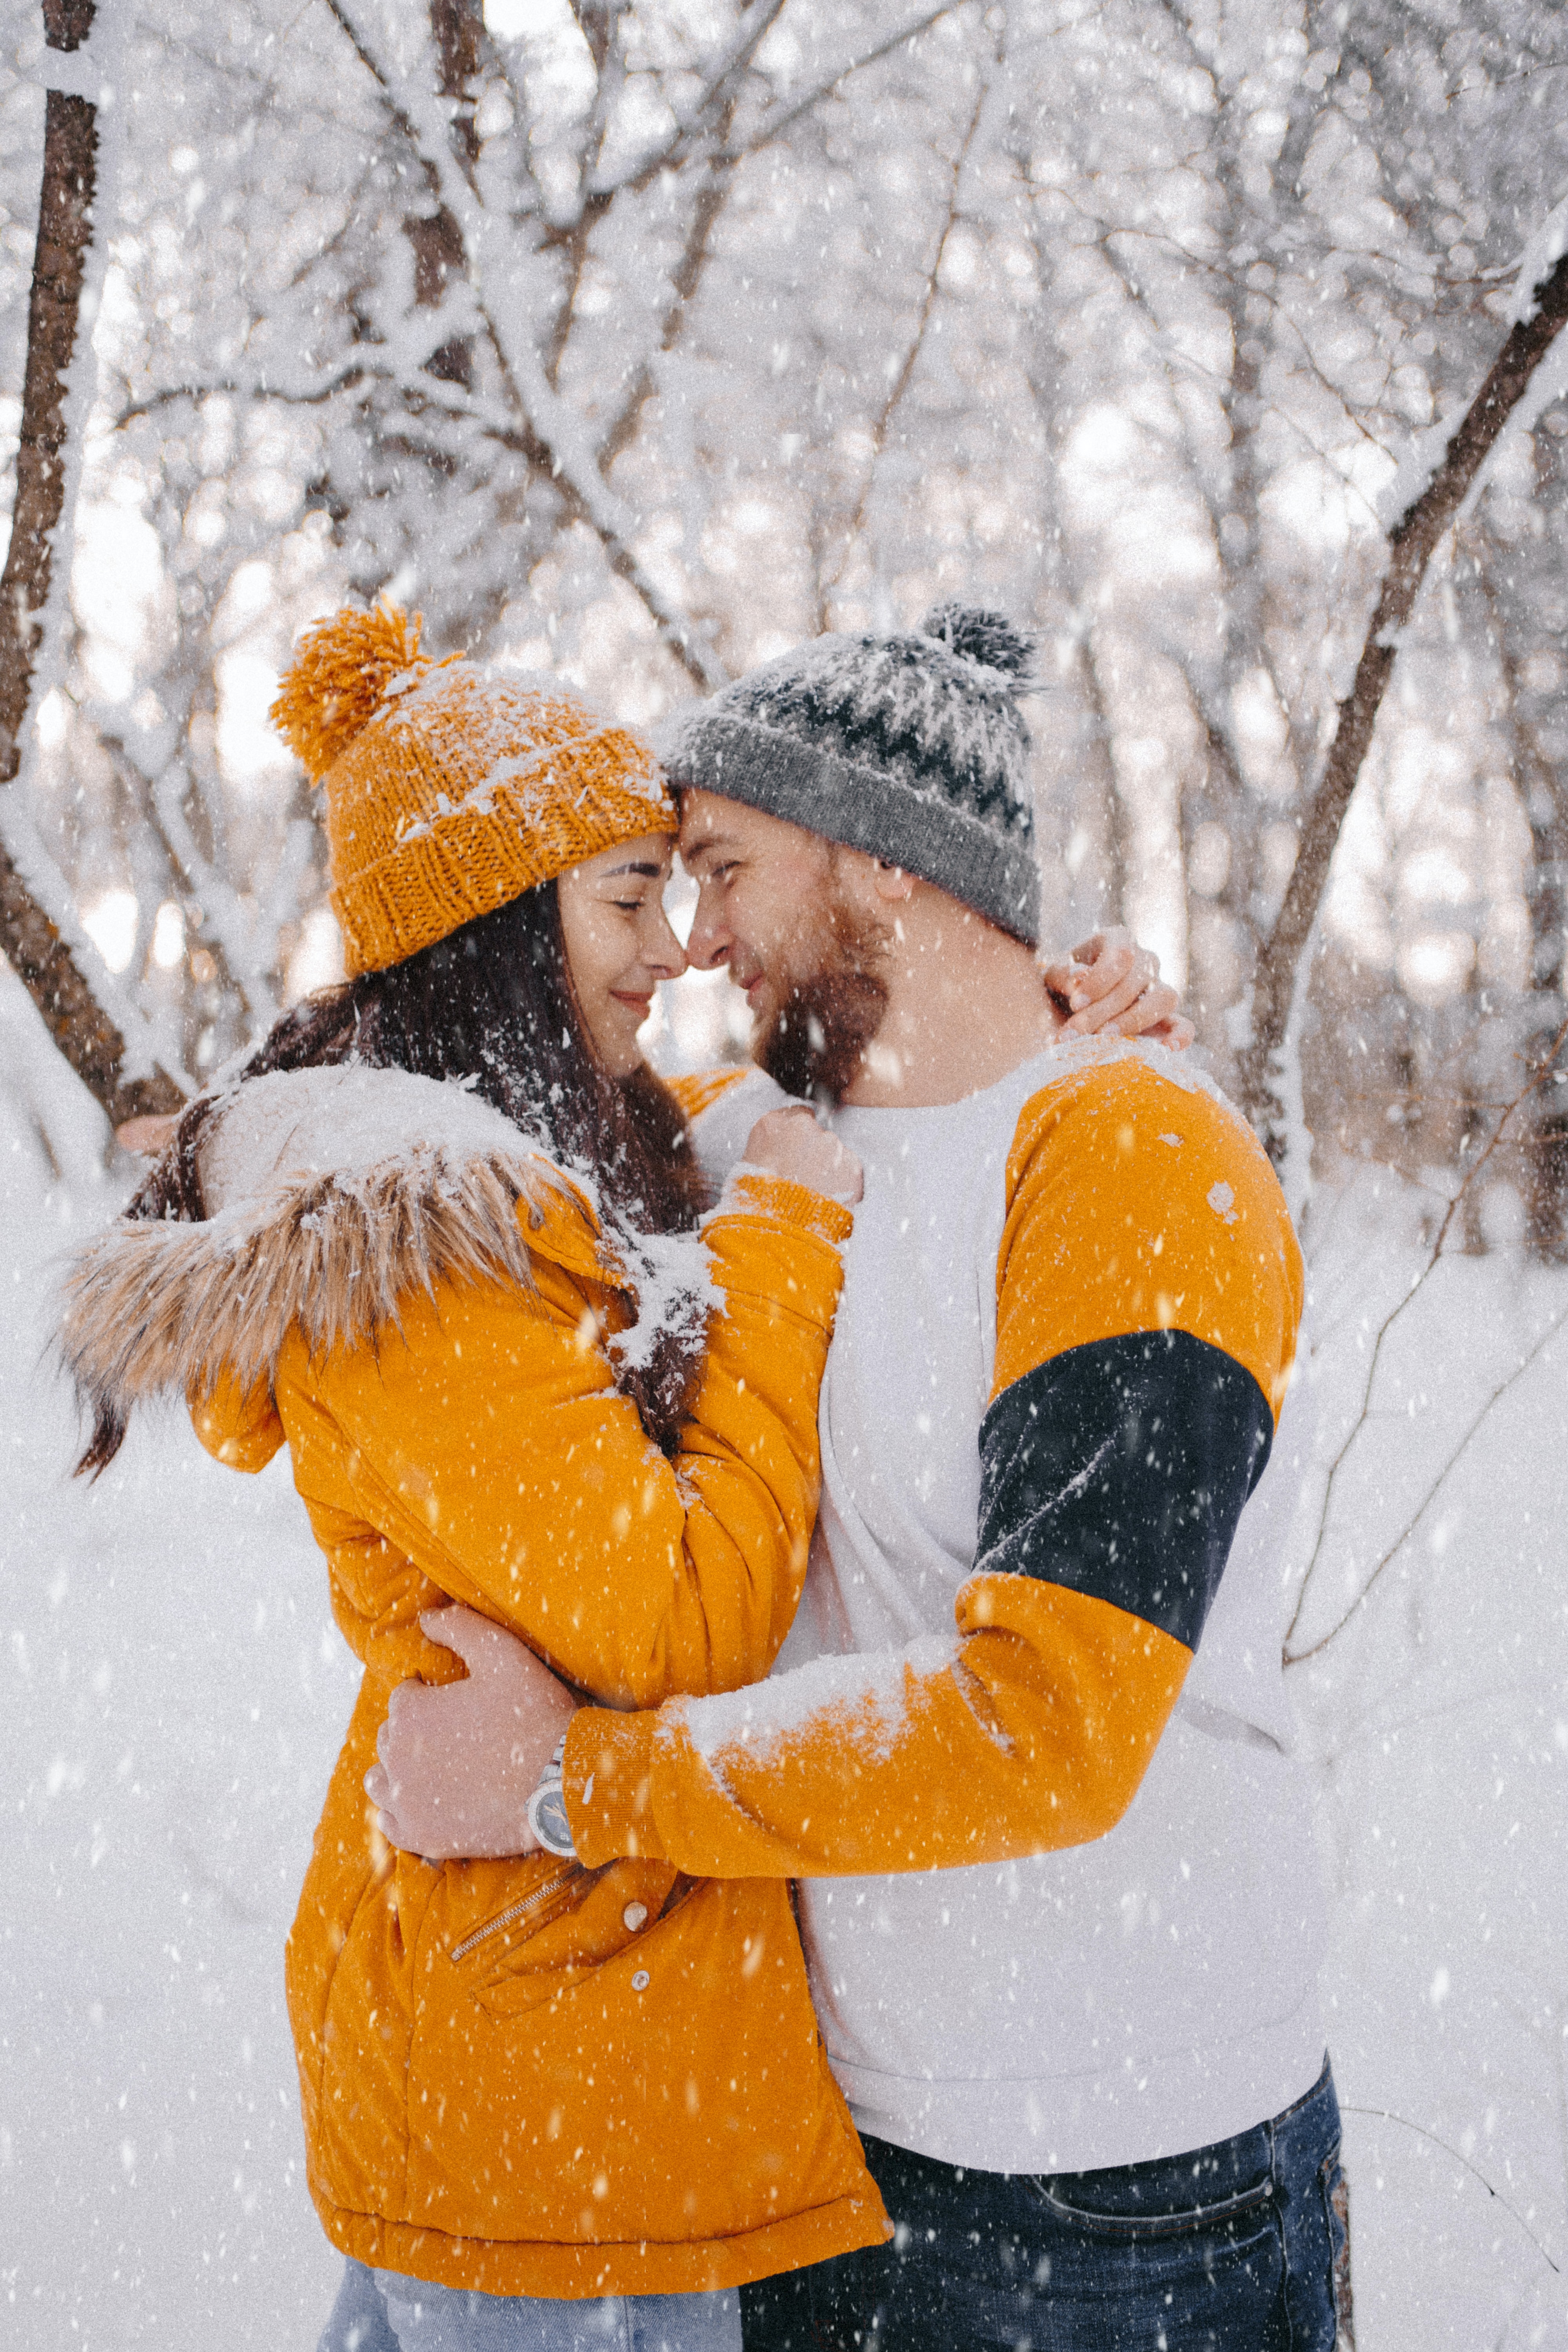 Romantic couple on a snowy day | Source: Unsplash